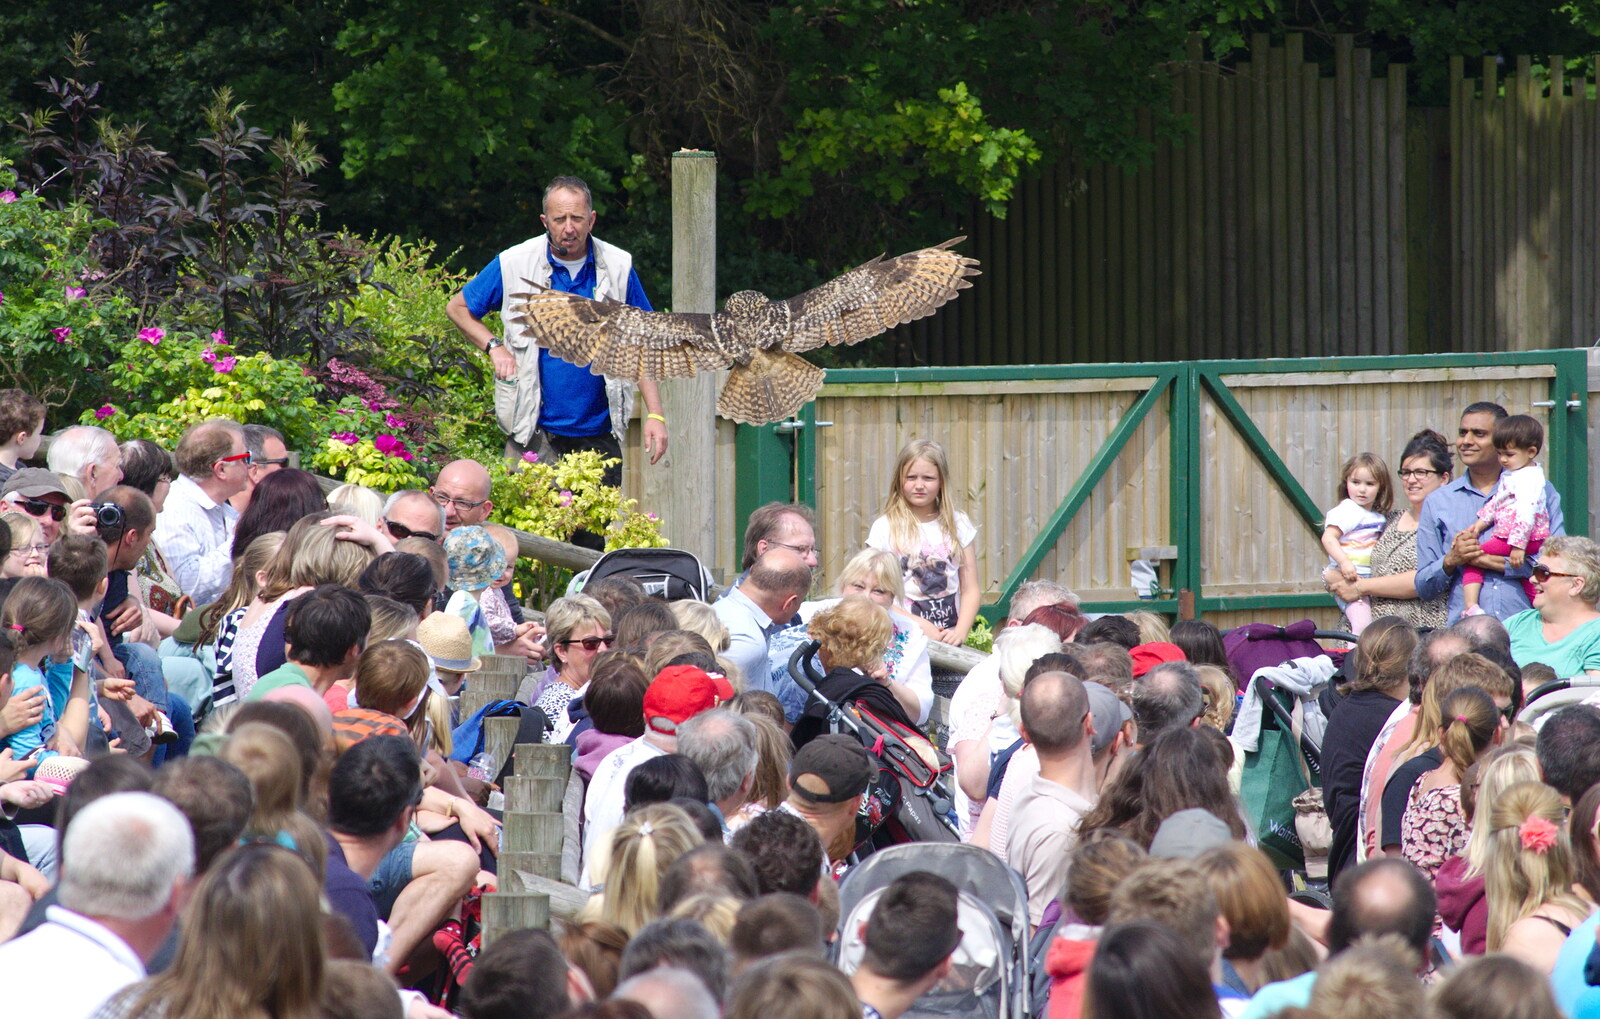 A Birthday Trip to the Zoo, Banham, Norfolk - 26th May 2014: The Eagle Owl flies low over the crowds